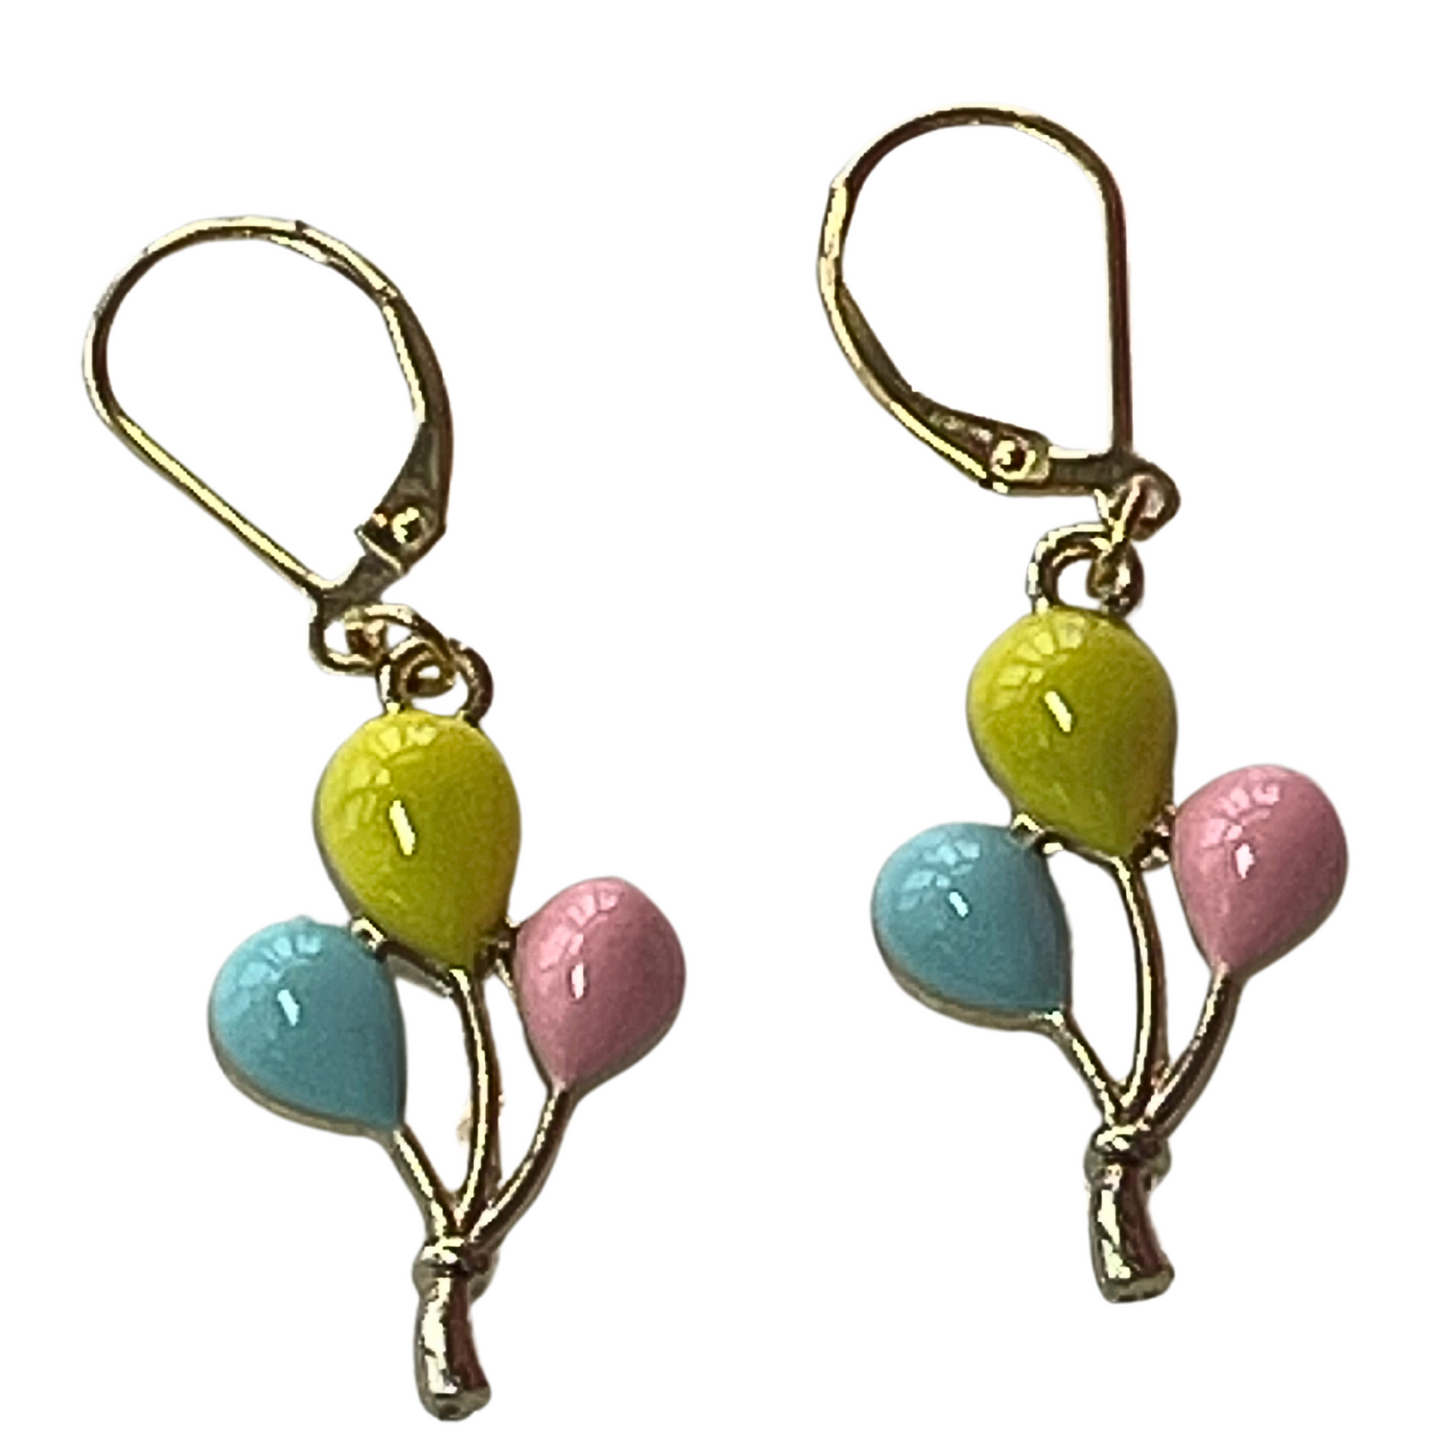 gold lever earrings with three balloons. a yellow balloon. blue balloon. pink balloon. the balloon are all surrounded by 14 karat gold